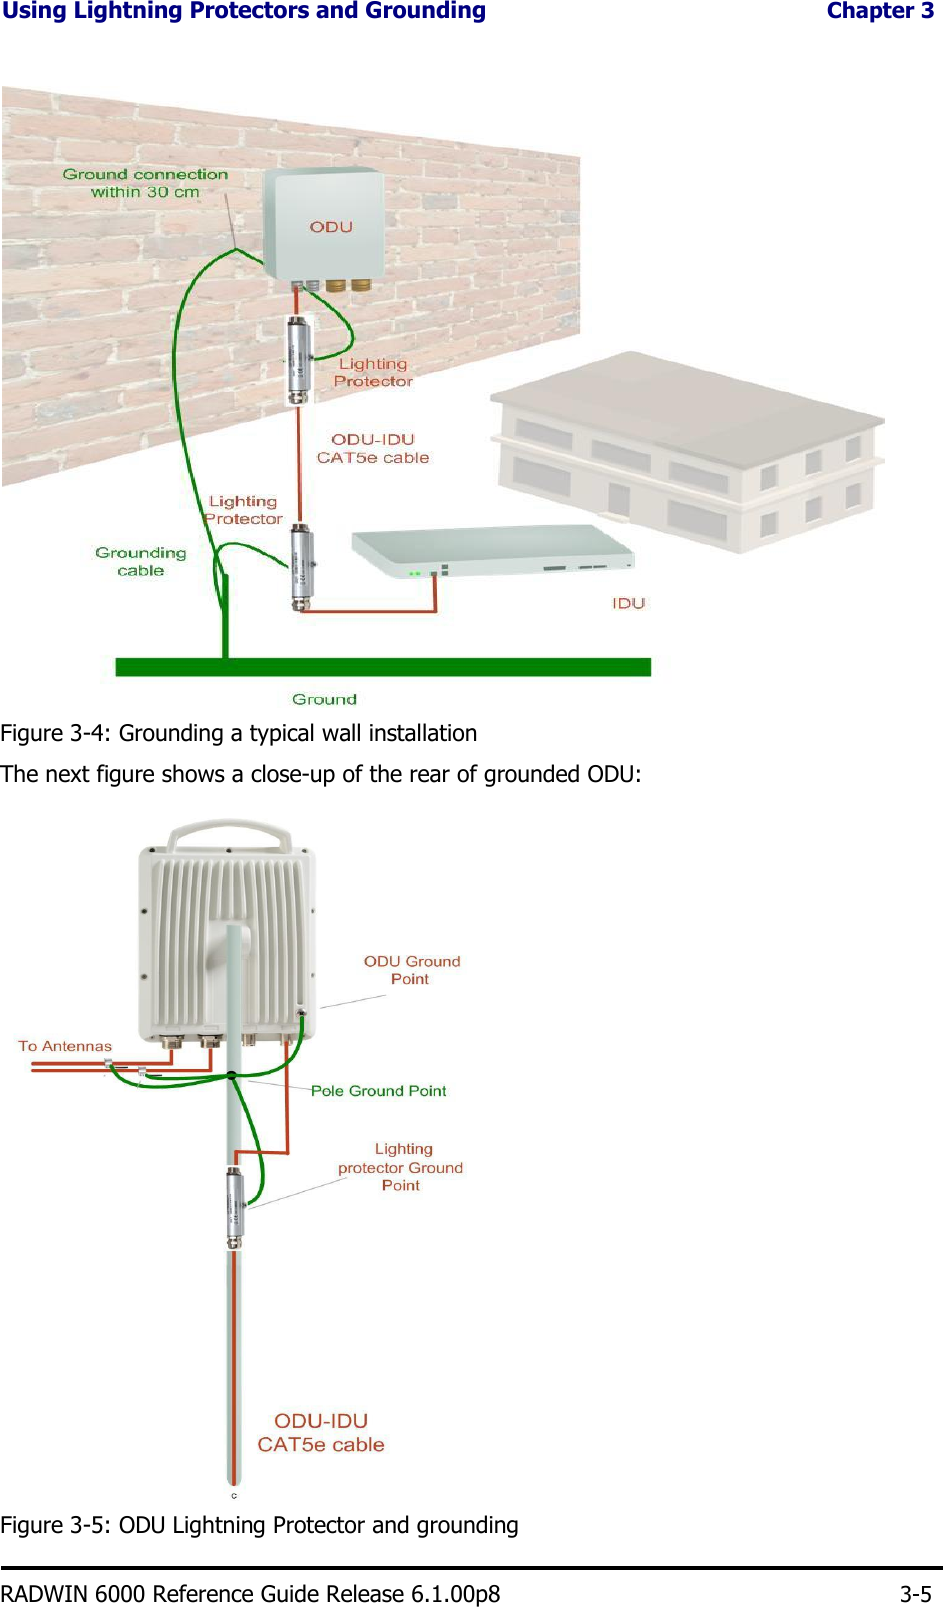 Using Lightning Protectors and Grounding Chapter 3                                  Figure 3-4: Grounding a typical wall installation  The next figure shows a close-up of the rear of grounded ODU:                                   Figure 3-5: ODU Lightning Protector and grounding  RADWIN 6000 Reference Guide Release 6.1.00p8      3-5